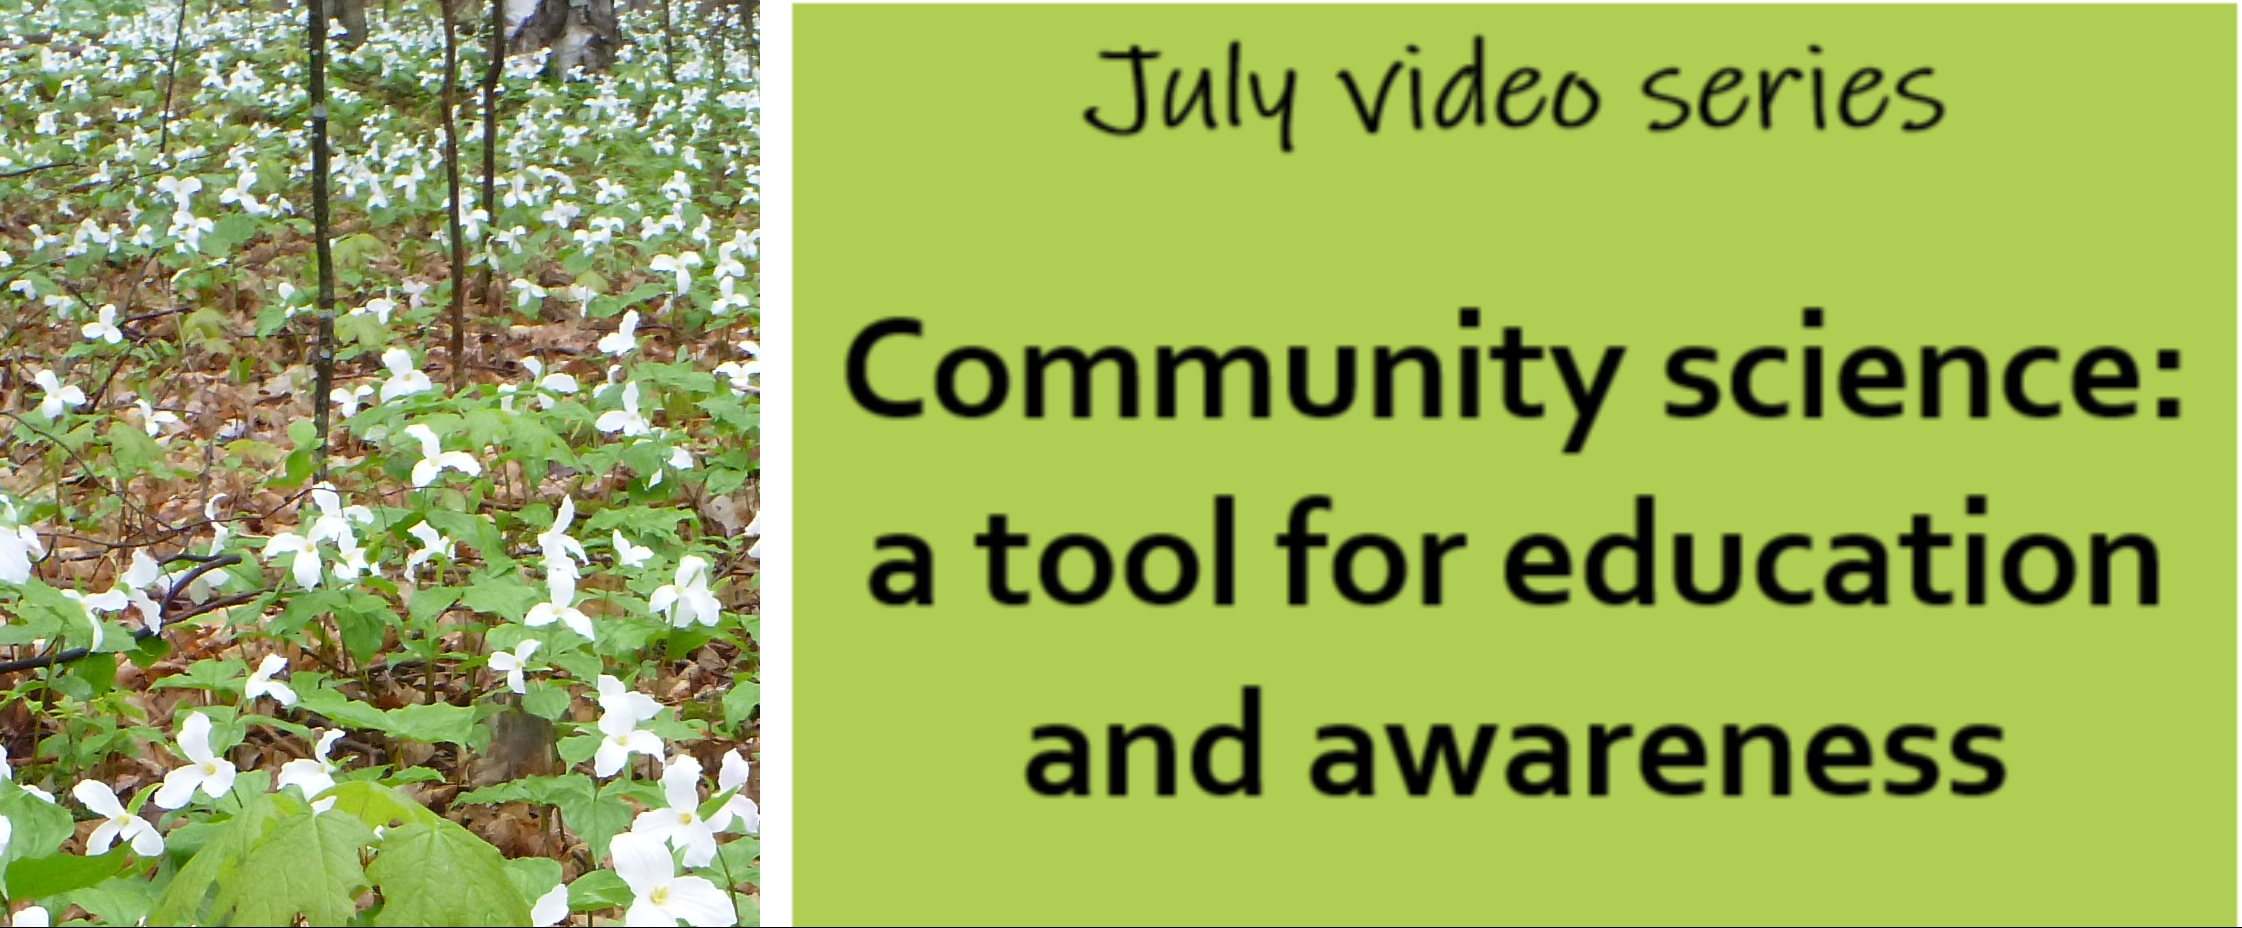 Trilliums on forest background with title community science video series in text